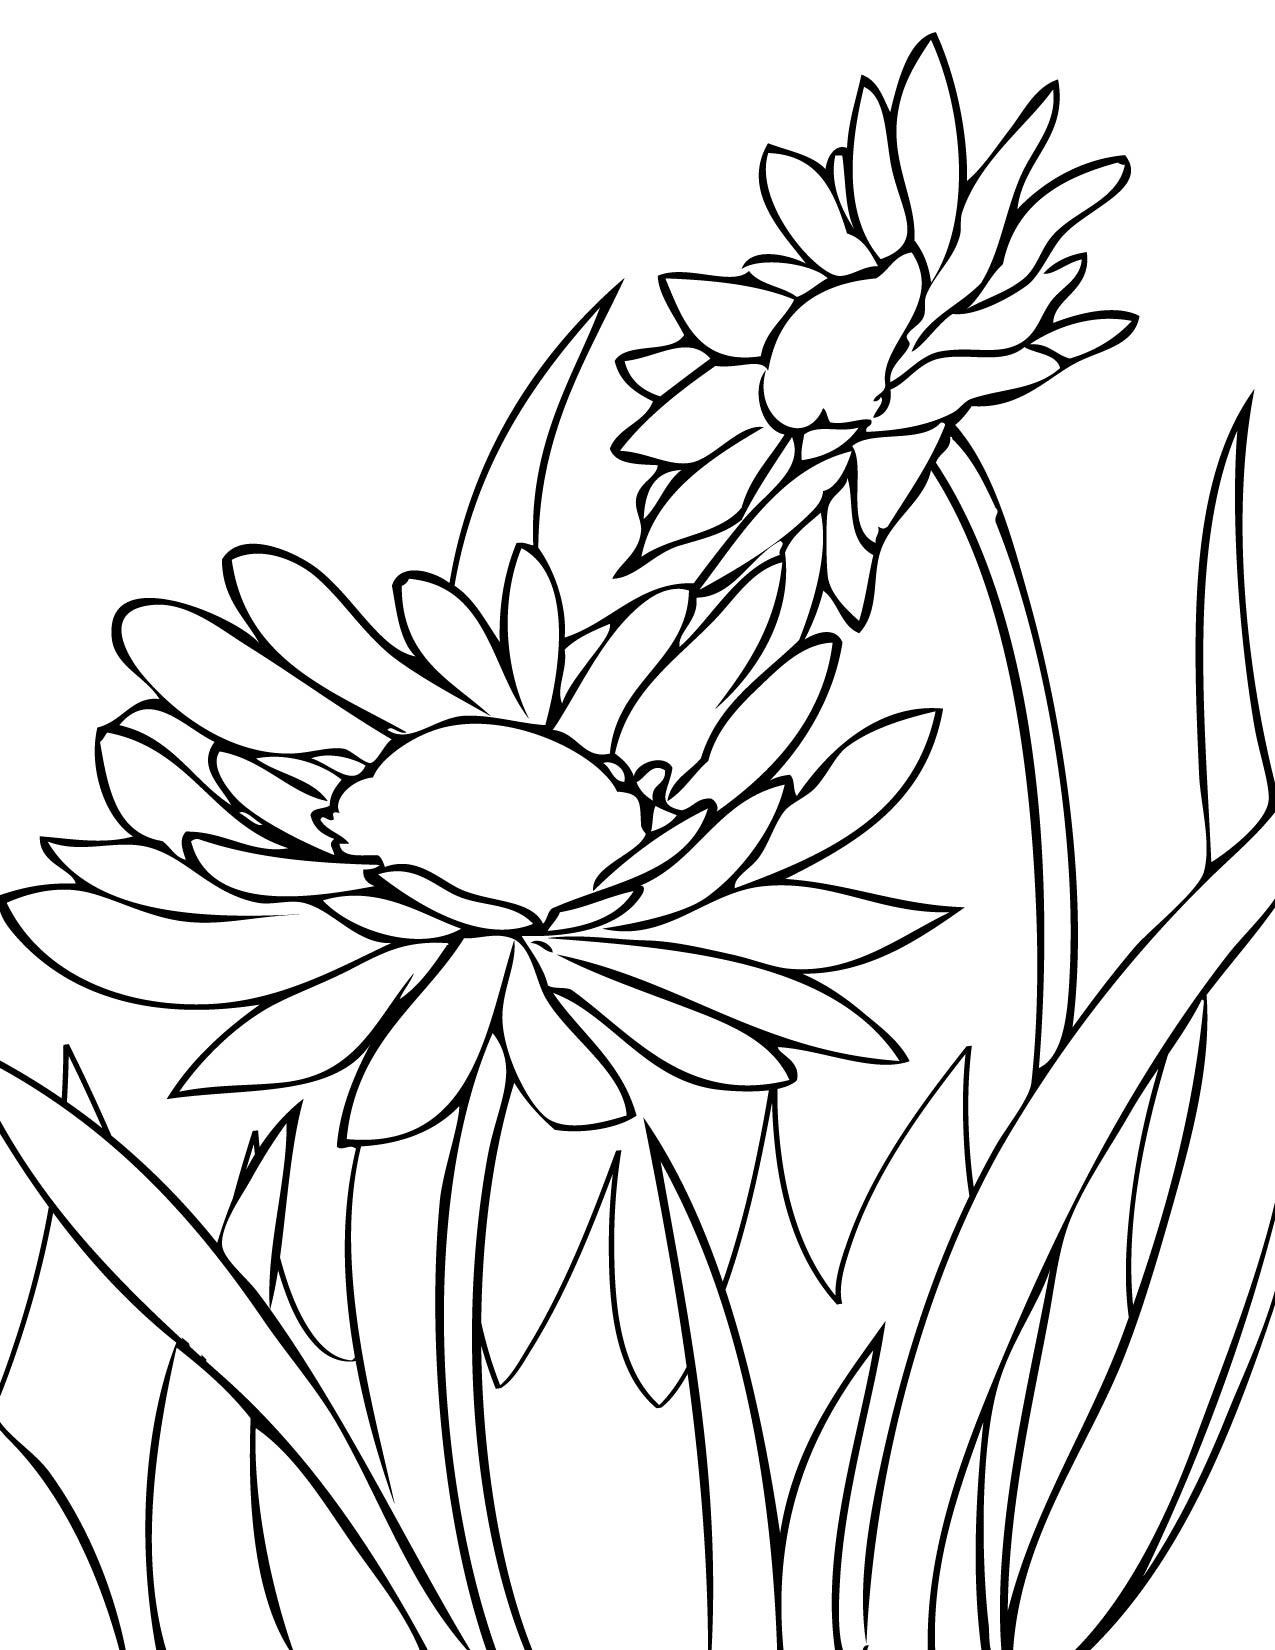 Gerber Daisy Coloring Pages At Getdrawings Free Download